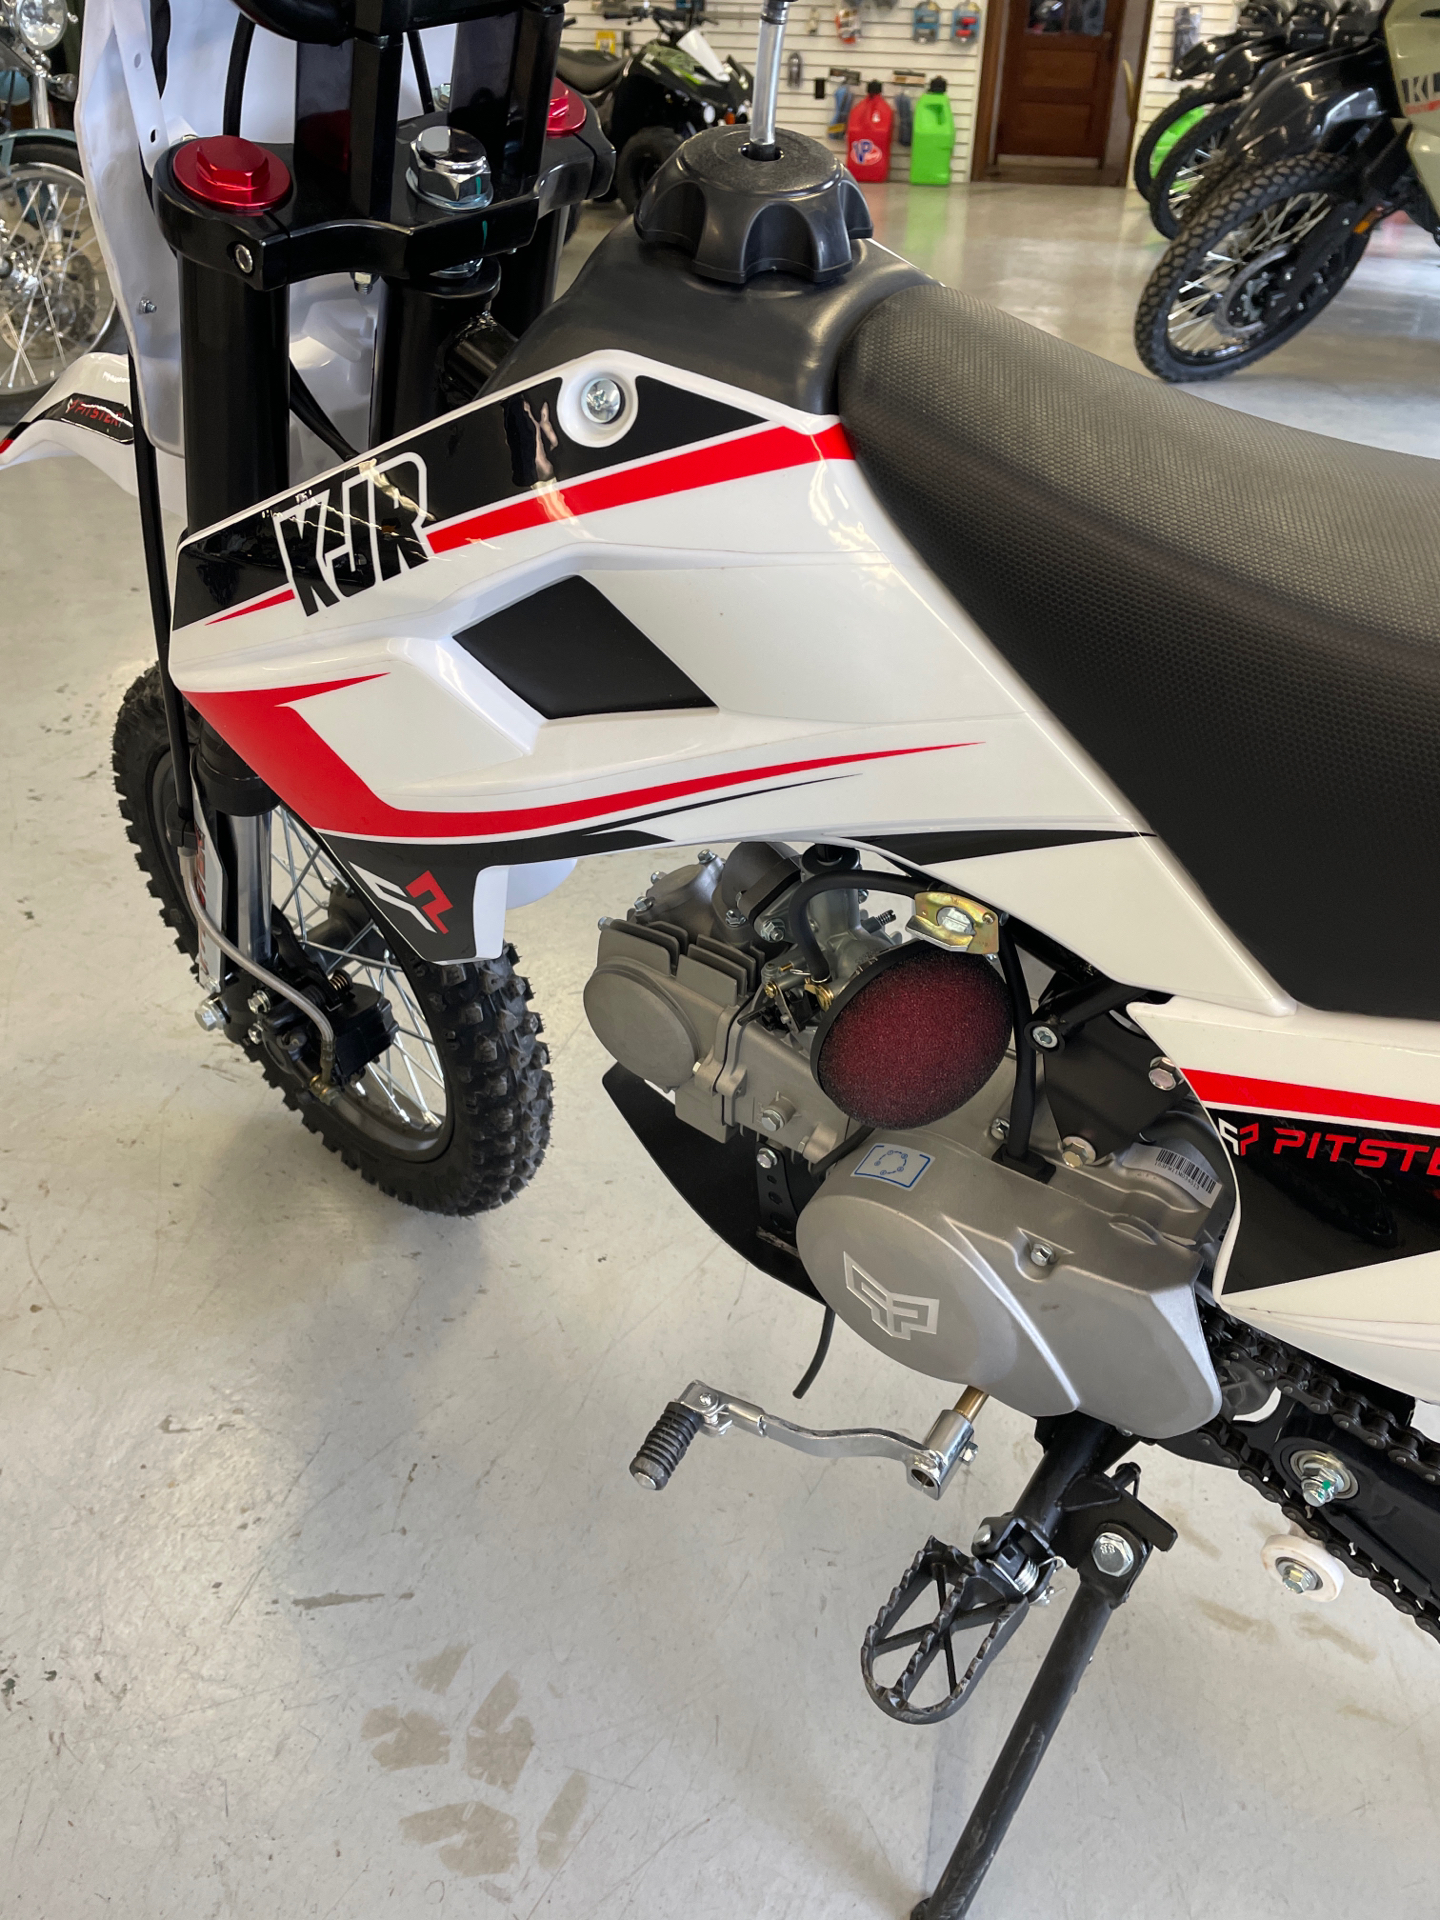 2021 Pitster Pro XJR125 MANUAL in Annville, Pennsylvania - Photo 7